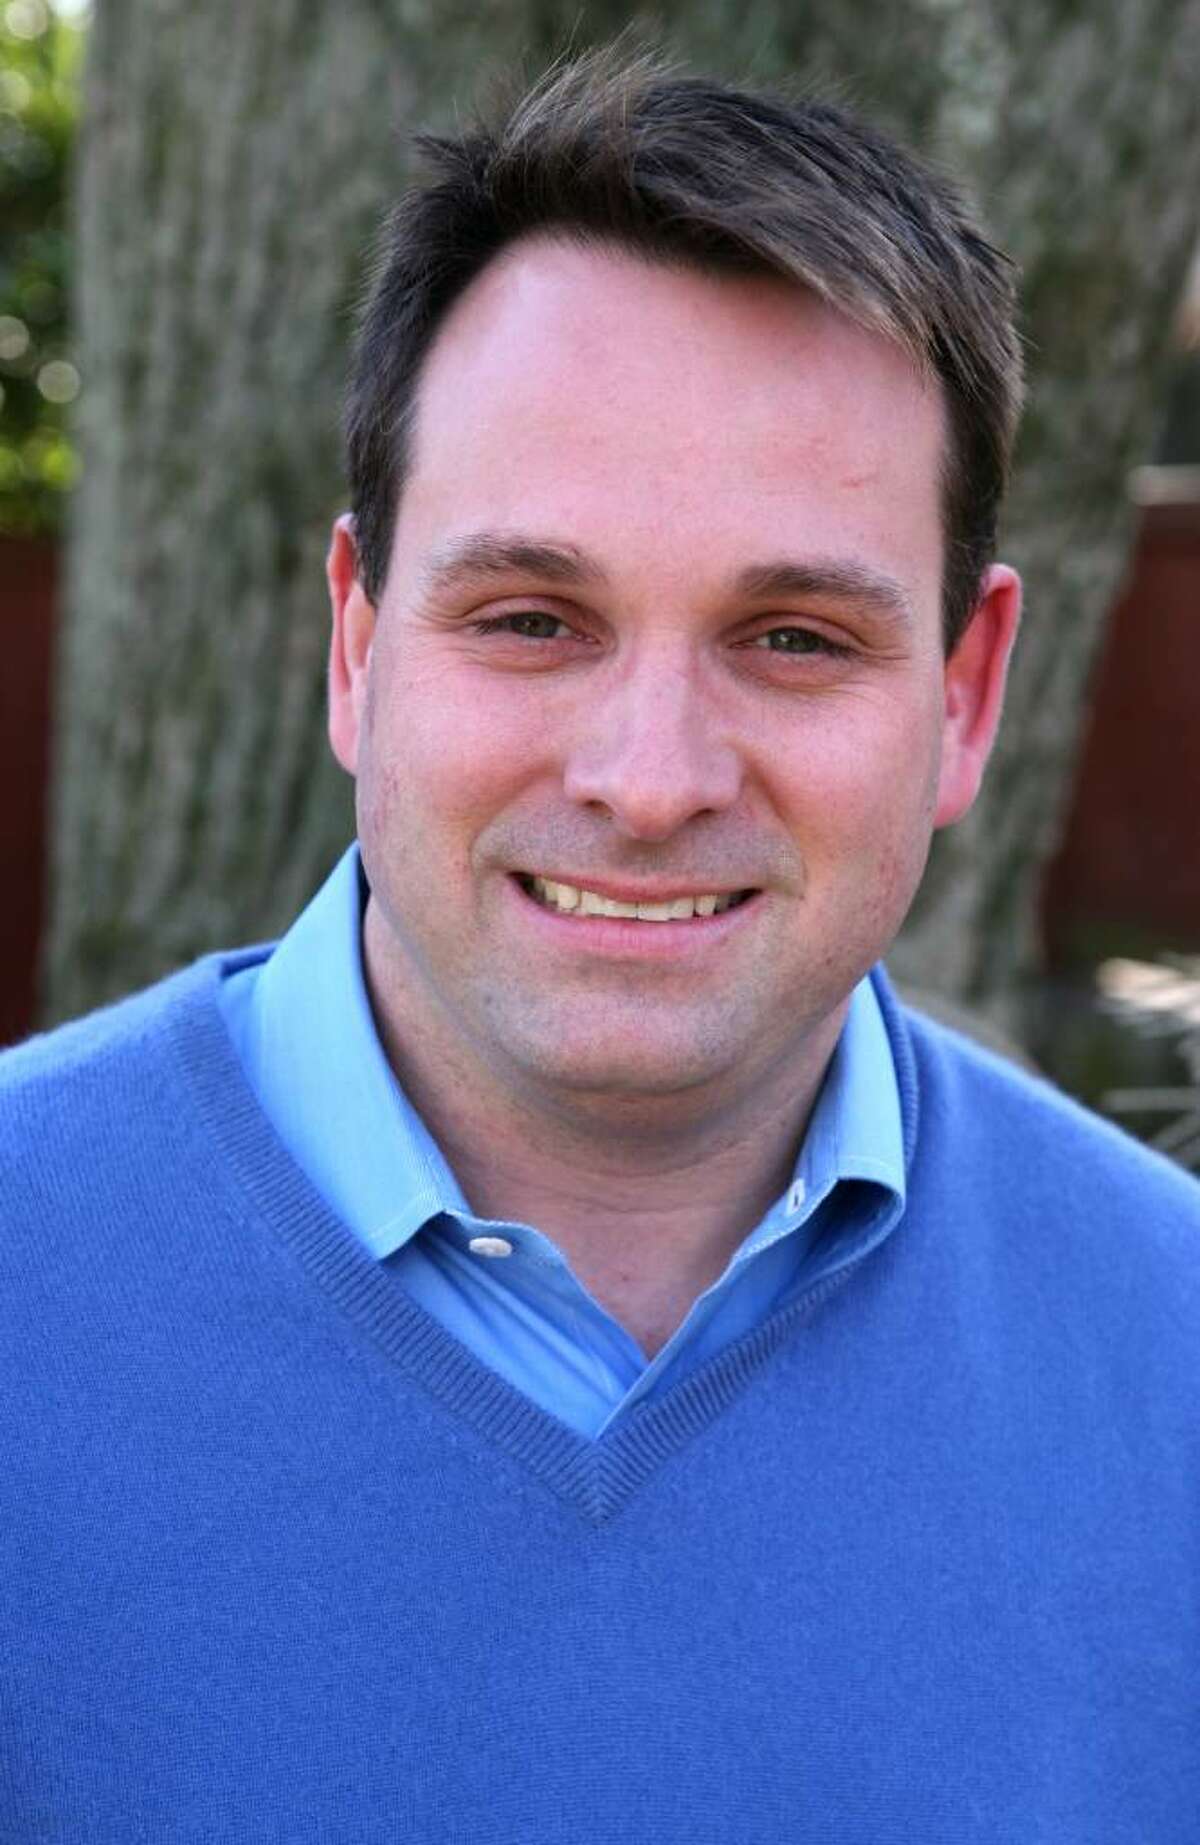 Drew Marzullo will be replacing fellow Democrat Lin Lavery on the Board of Selectmen after out-polling his running mate.